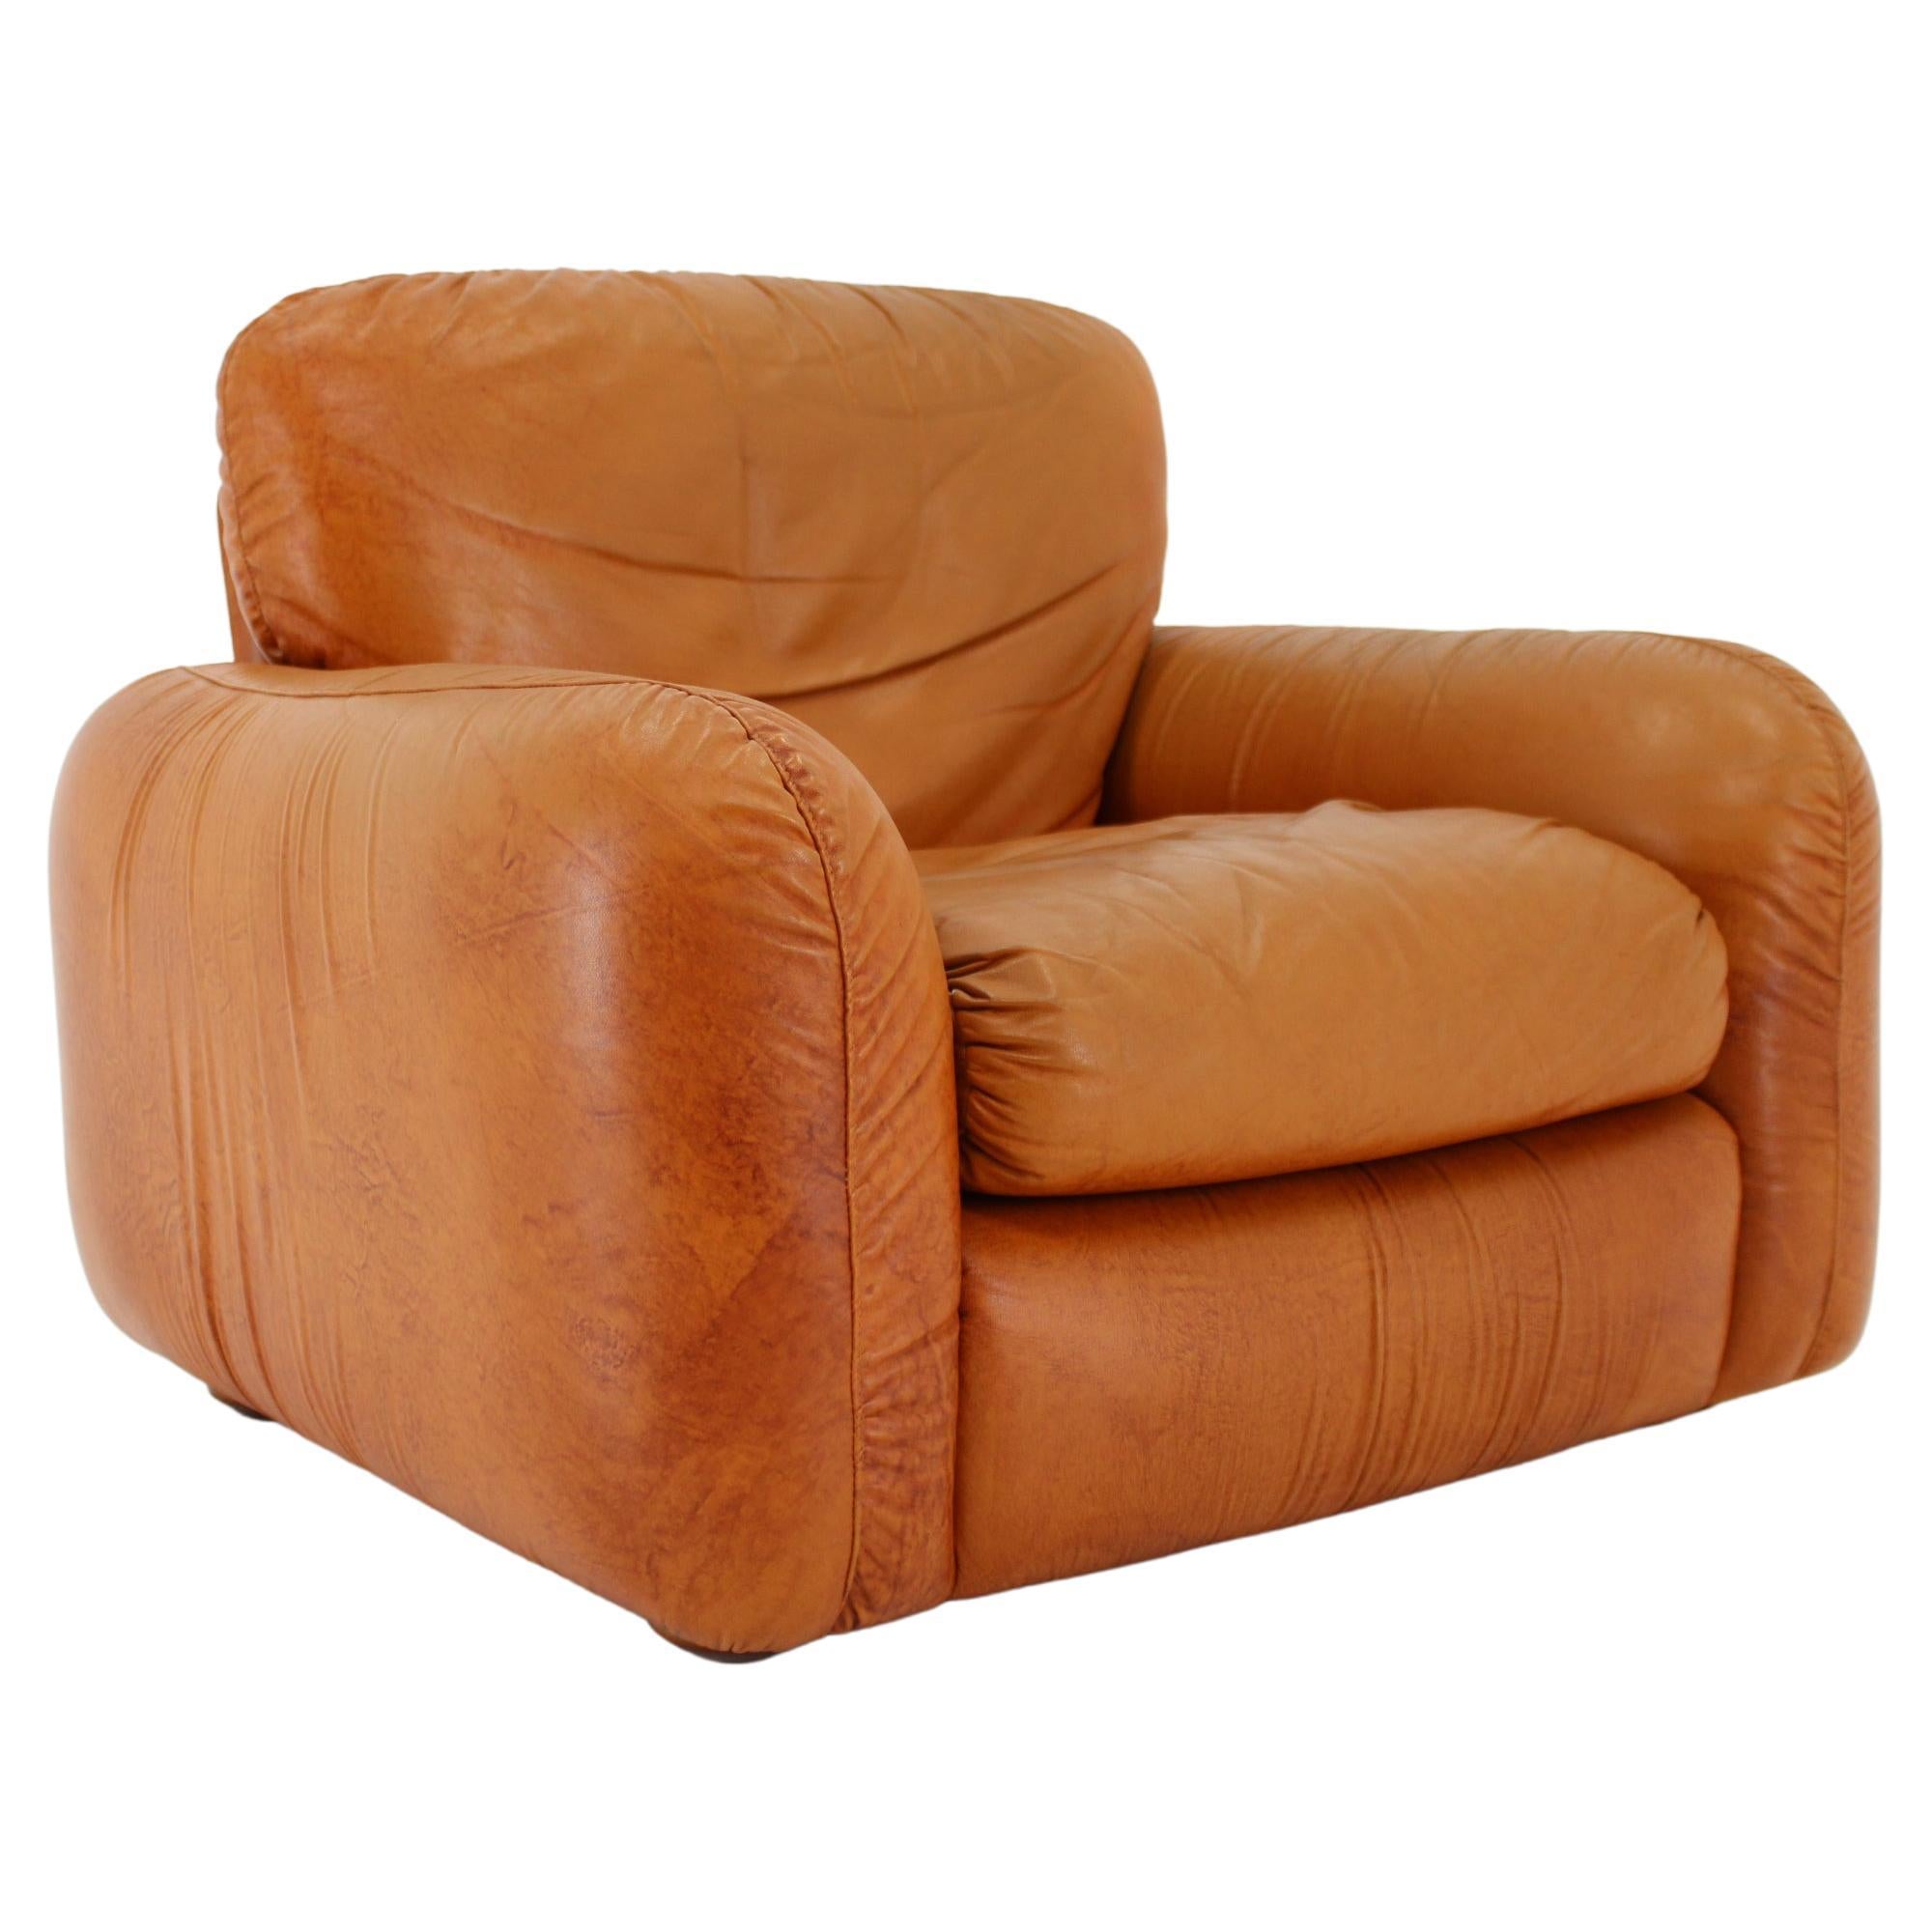 1970s  Cognac Leather Armchair, Italy For Sale